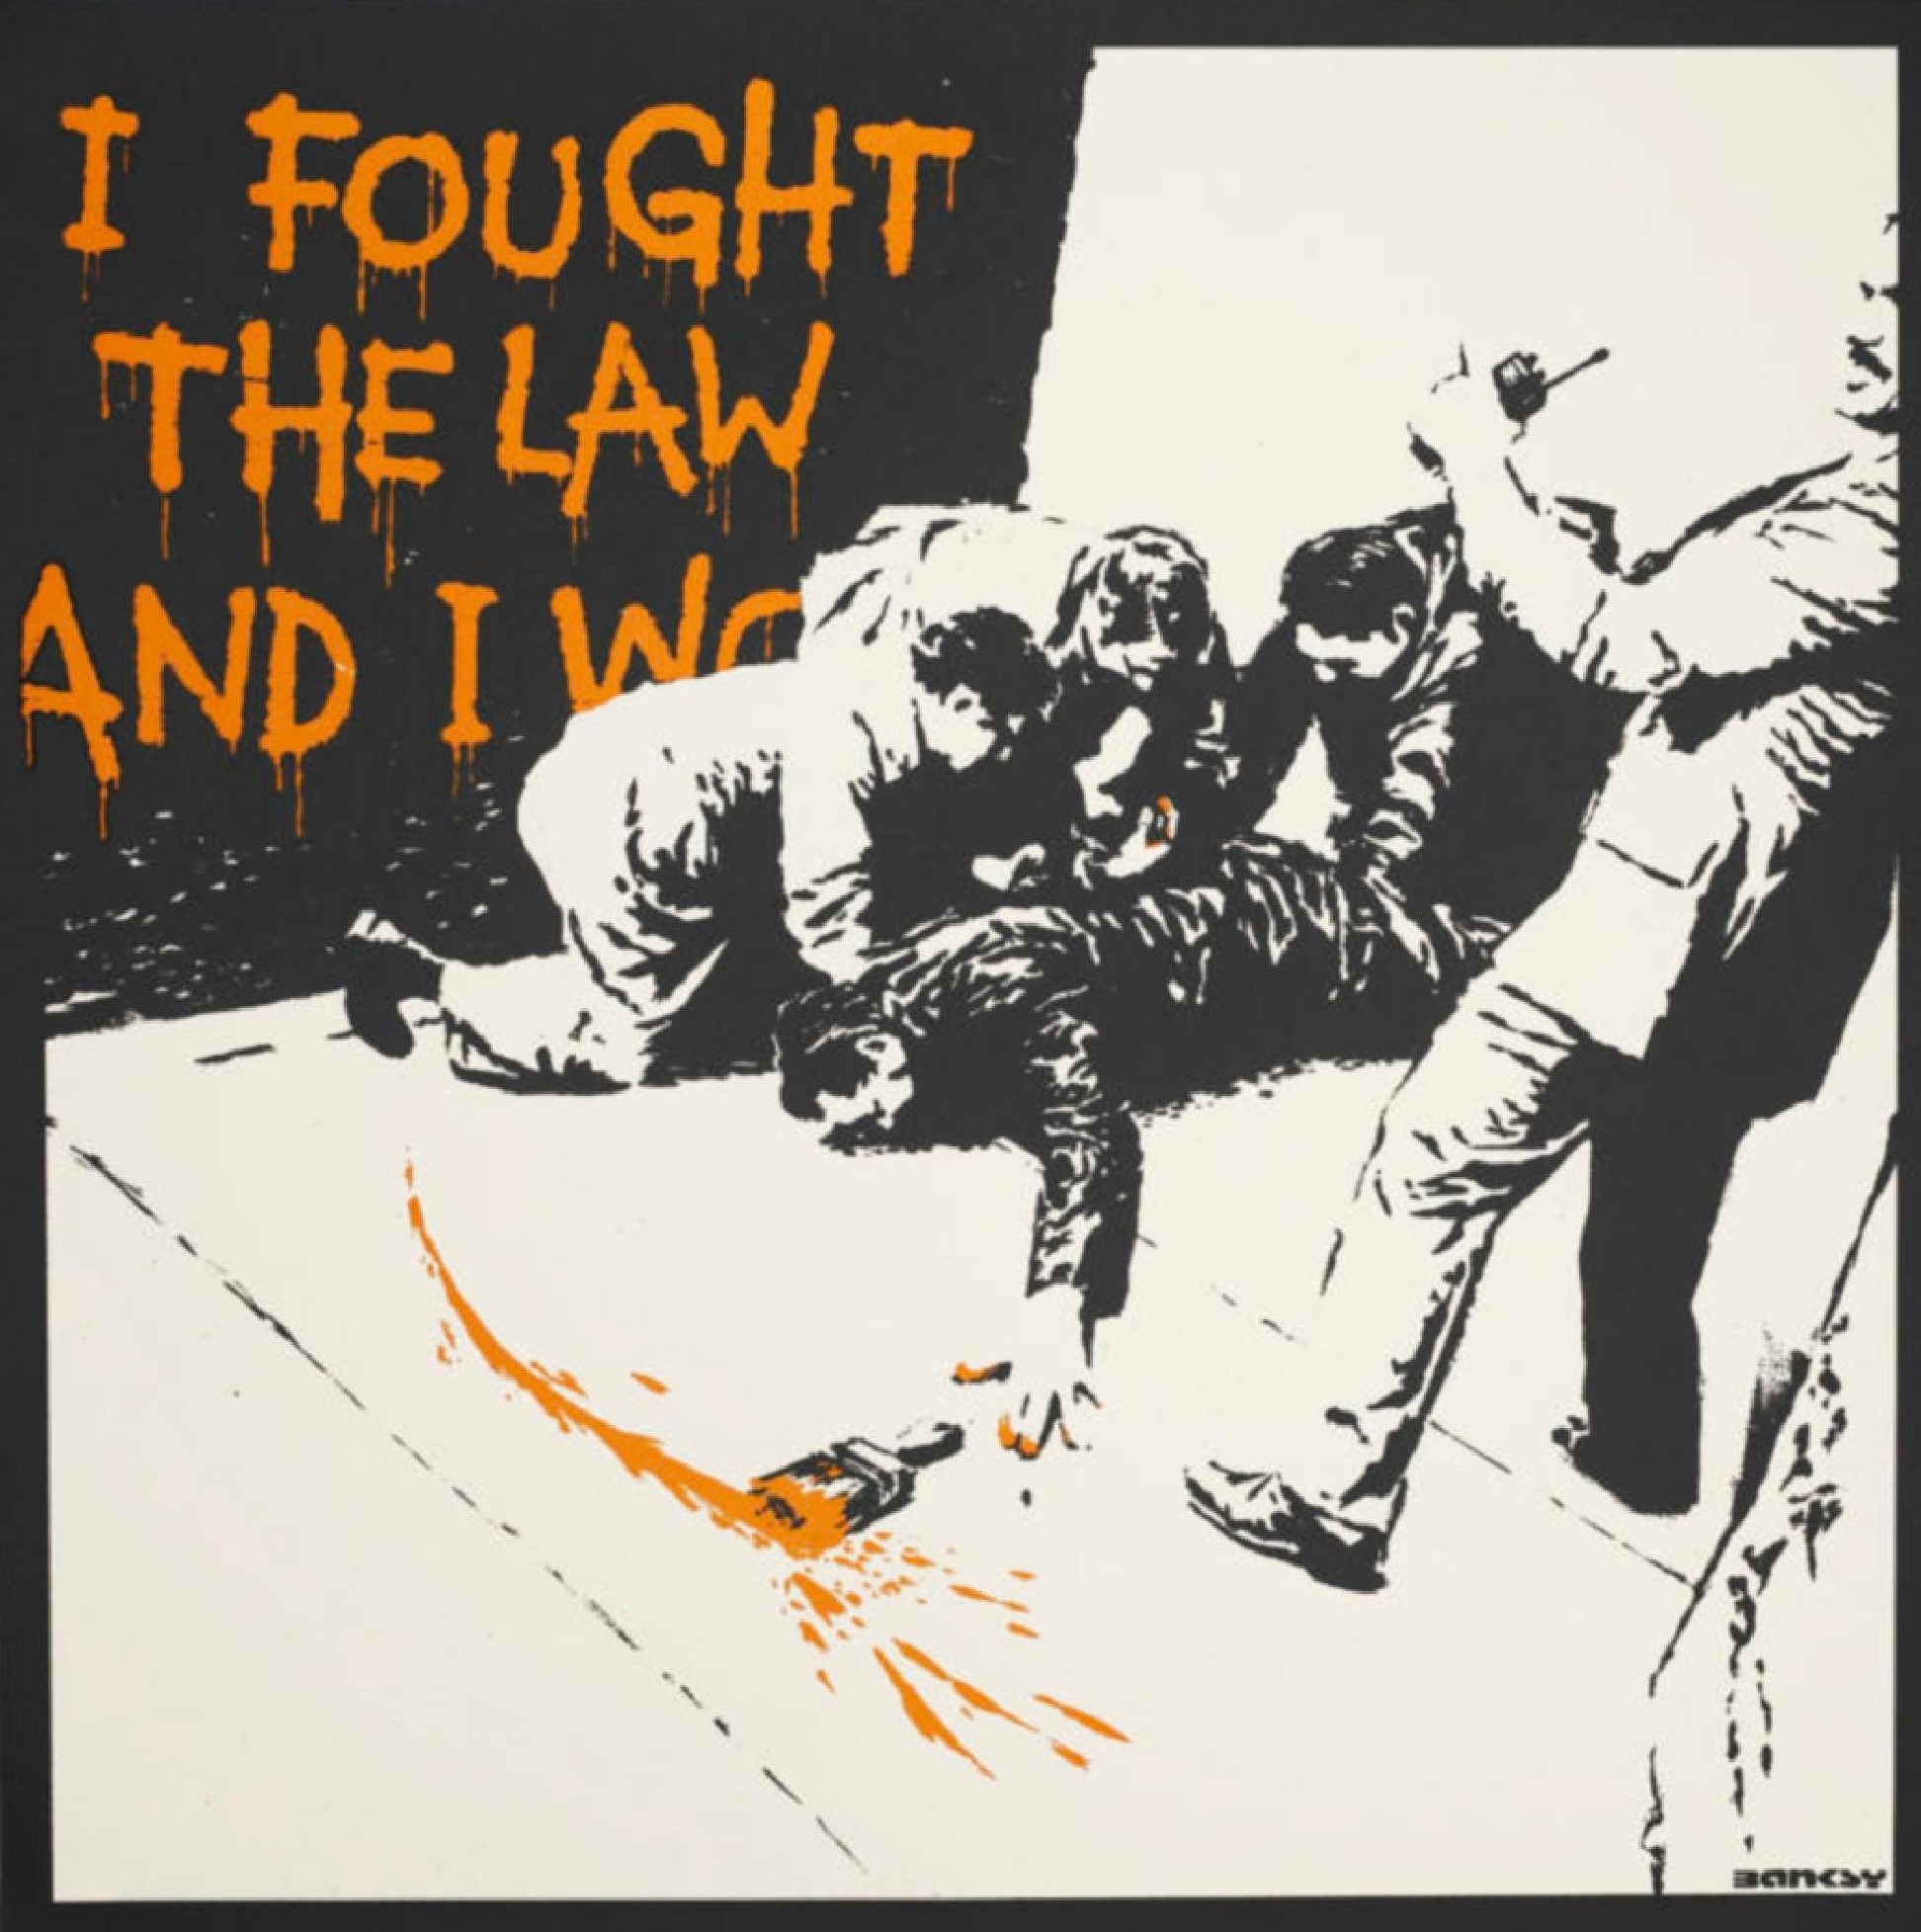 Banksy - I fought the law and I won - Lithograph Print